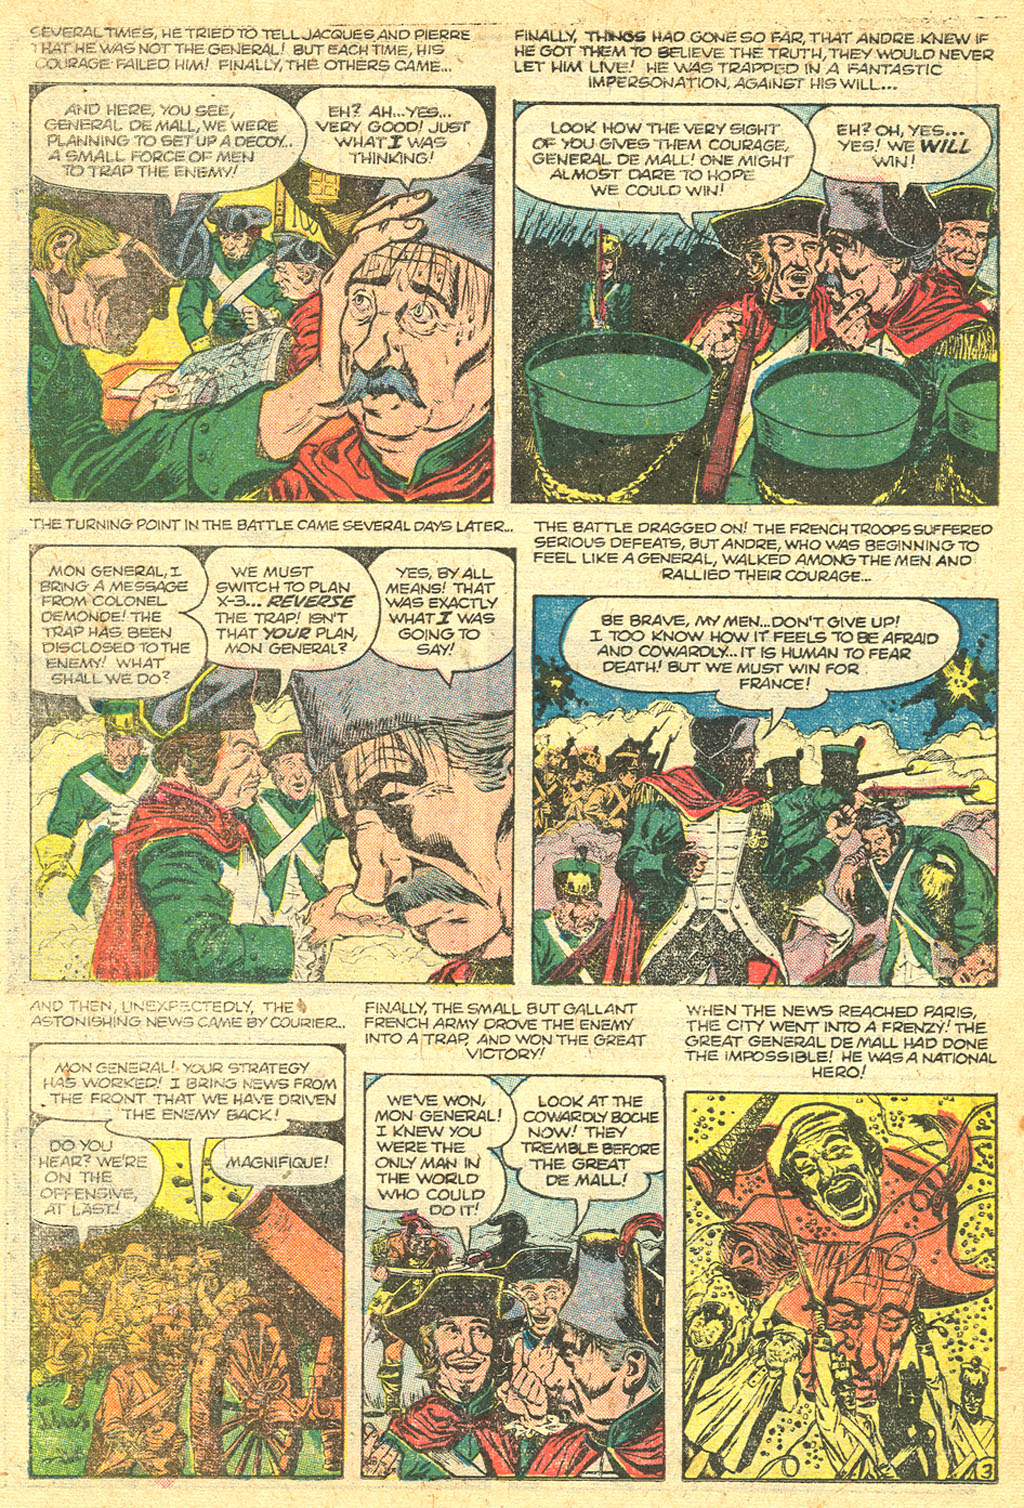 Marvel Tales (1949) 133 Page 29